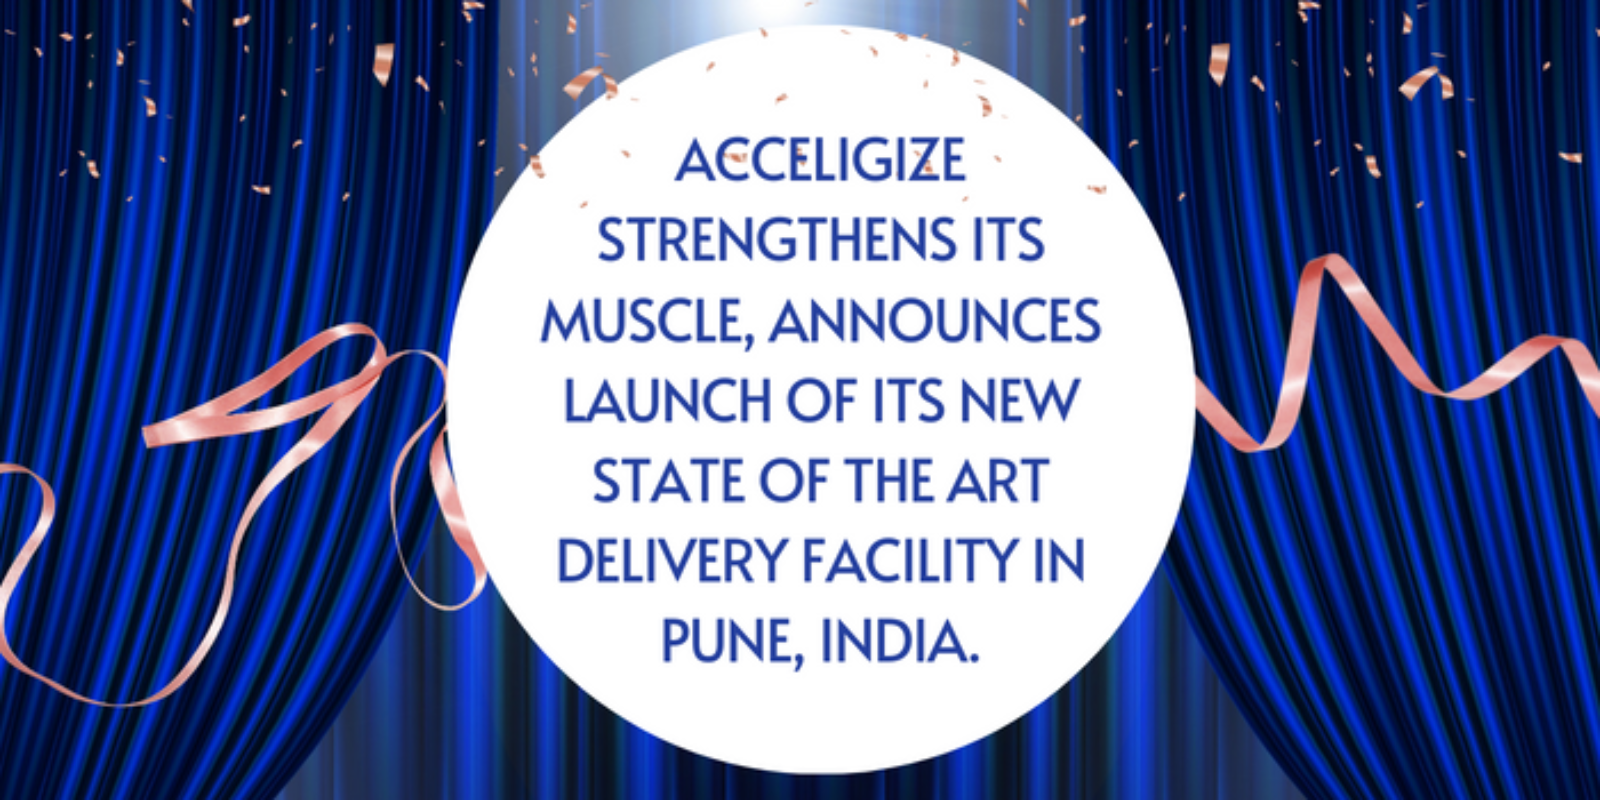 ACCELIGIZE STRENGTHENS ITS MUSCLE, ANNOUNCES LAUNCH OF ITS NEW STATE OF THE ART DELIVERY FACILITY IN PUNE, INDIA.